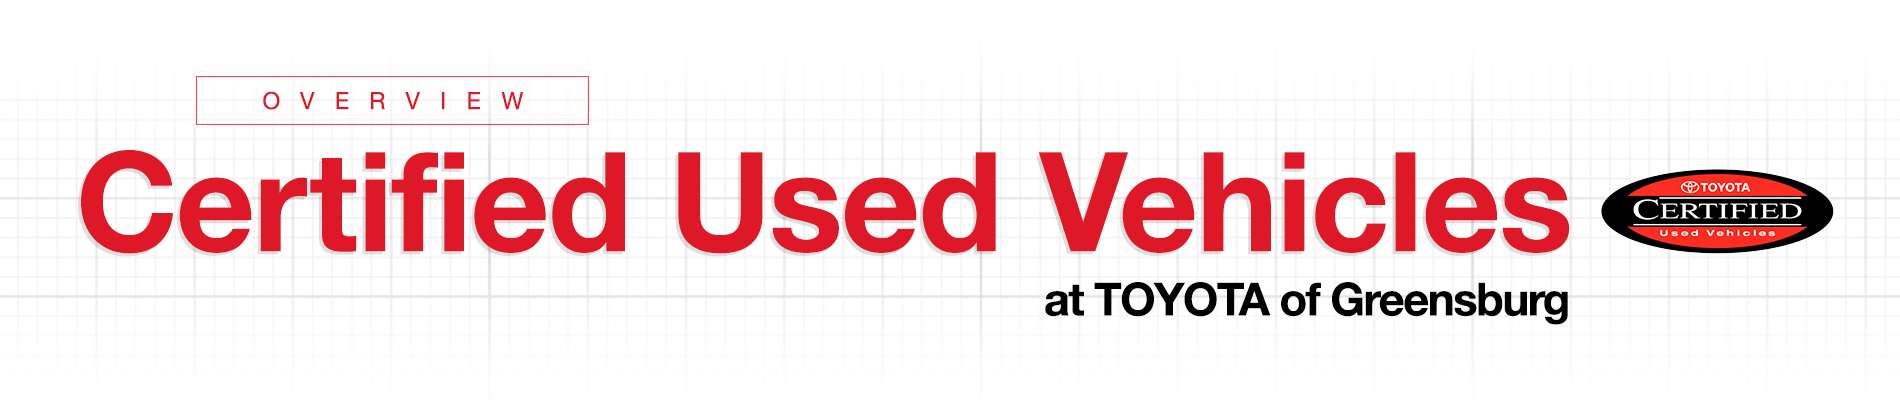 Certified Used Vehicle Overview Toyota of Greensburg in Greensburg PA